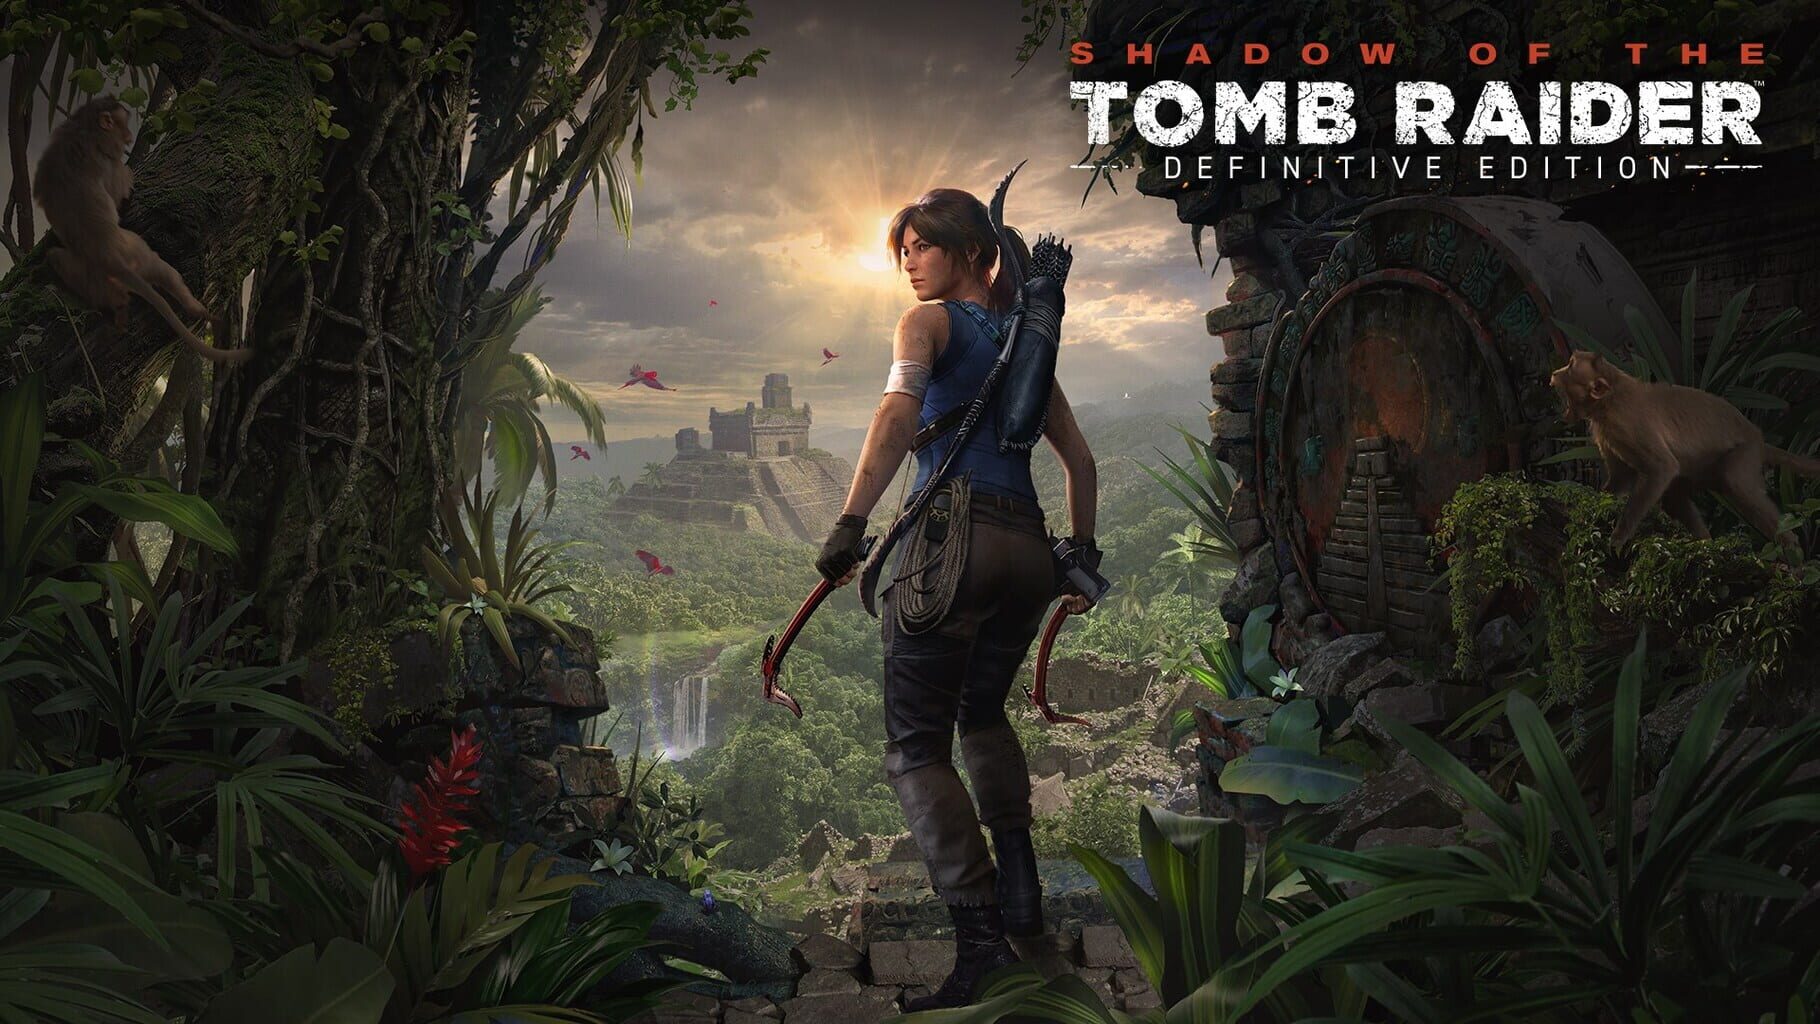 Arte - Shadow of the Tomb Raider: Definitive Edition